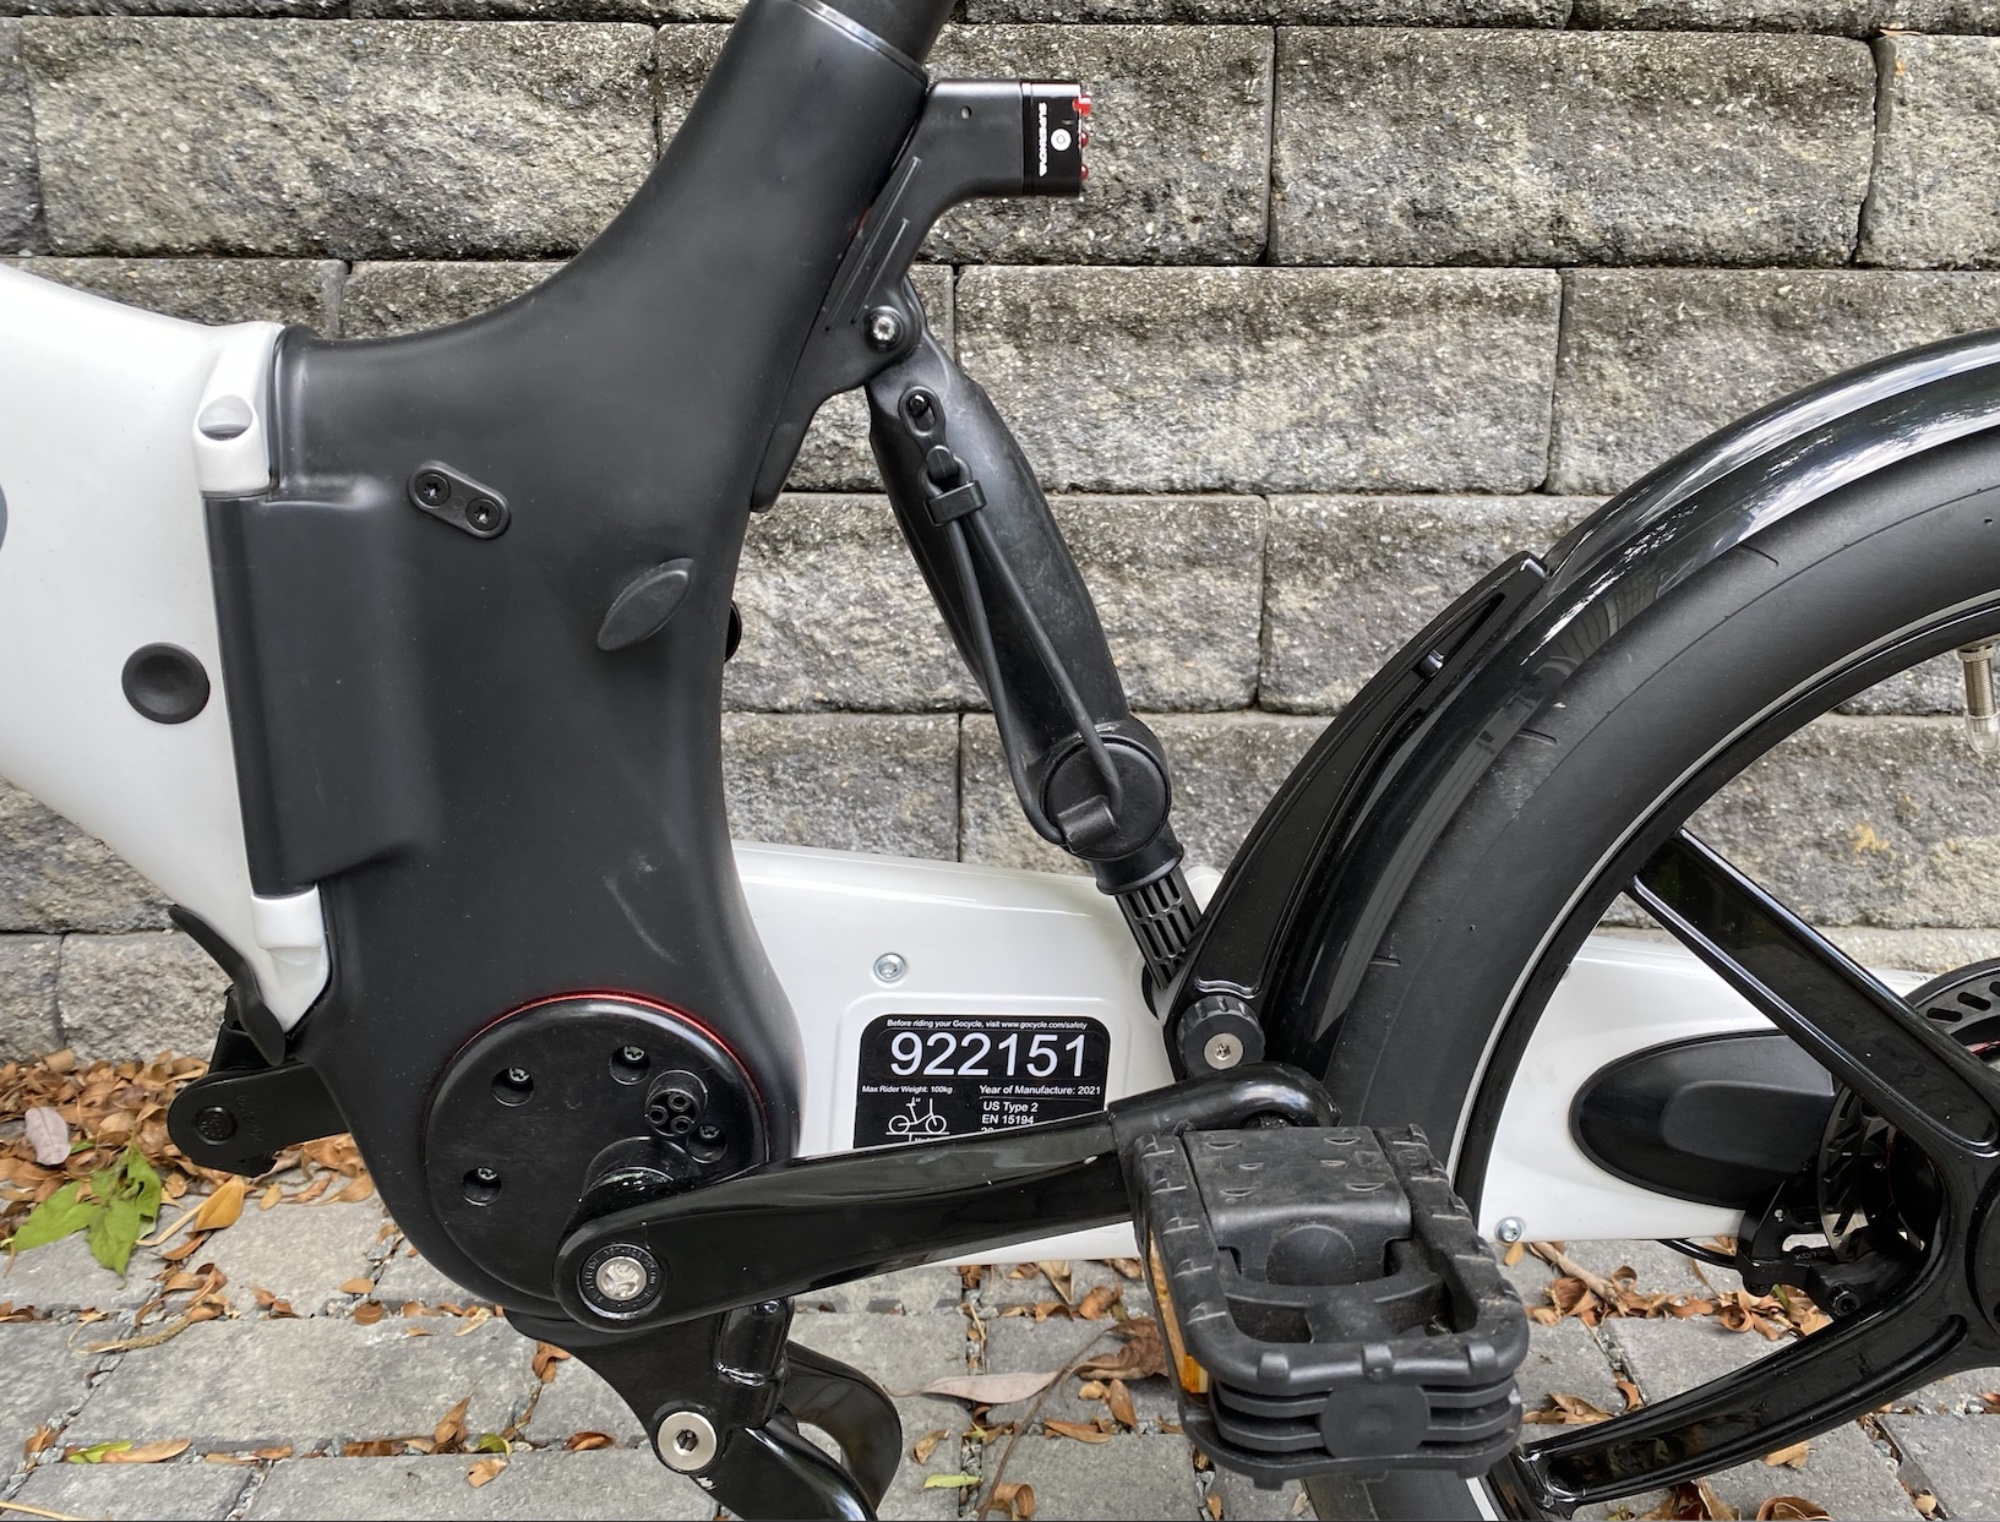 A close-up of the rear suspension. Note the elastic strap stowed on it—when the bike is folded, this clips onto a hook on the handlebars to keep it folded. Also note the black plastic handle to the left, which can be turned to release the seat post for storage.